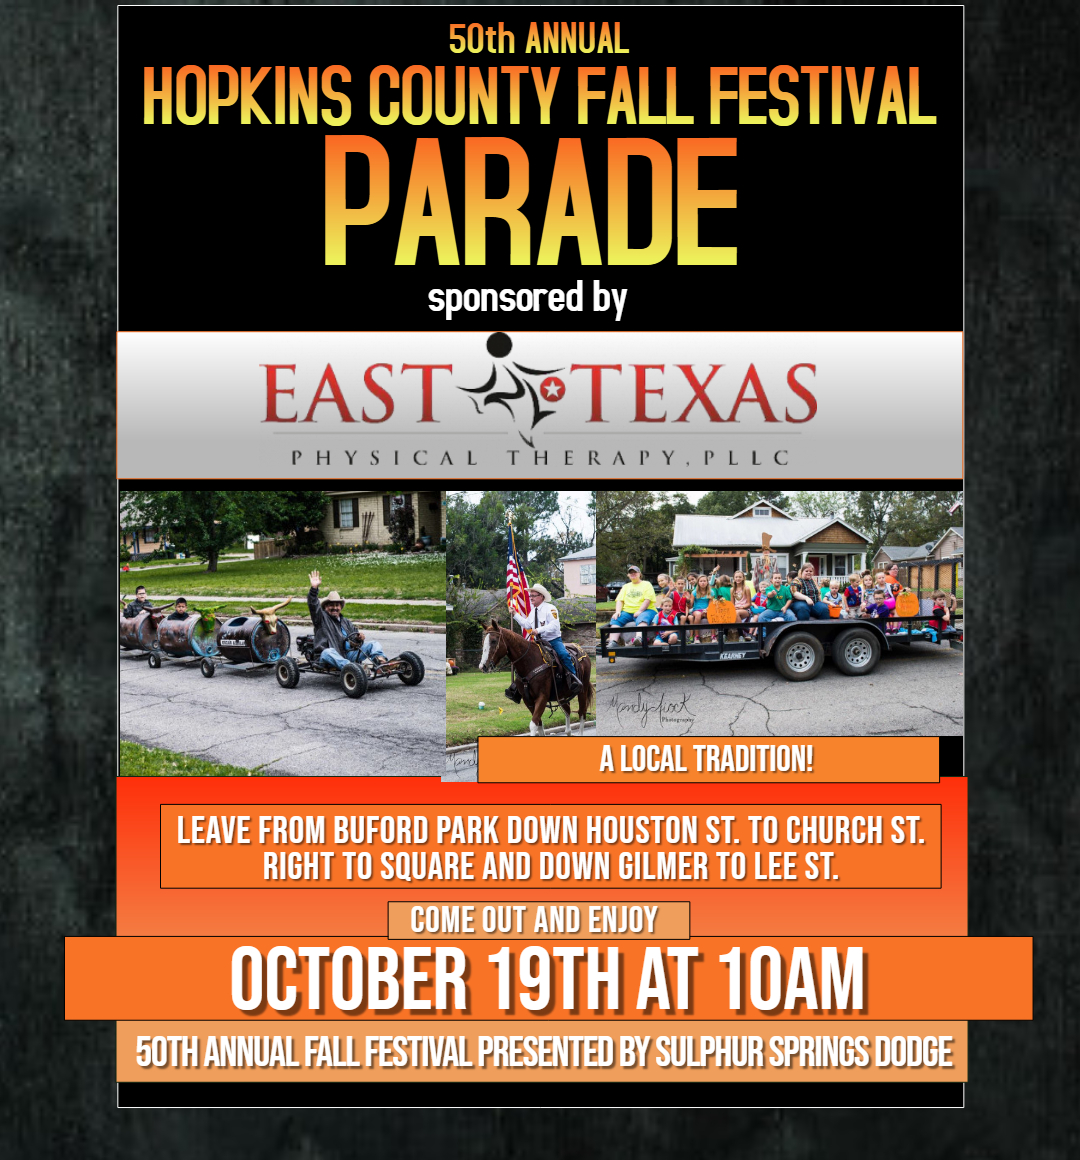 2019 Hopkins County Fall Festival Presented by SS Dodge Invites Public to Attend Annual Parade Sponsored by East Texas Physical Therapy on October 19th at 10 AM